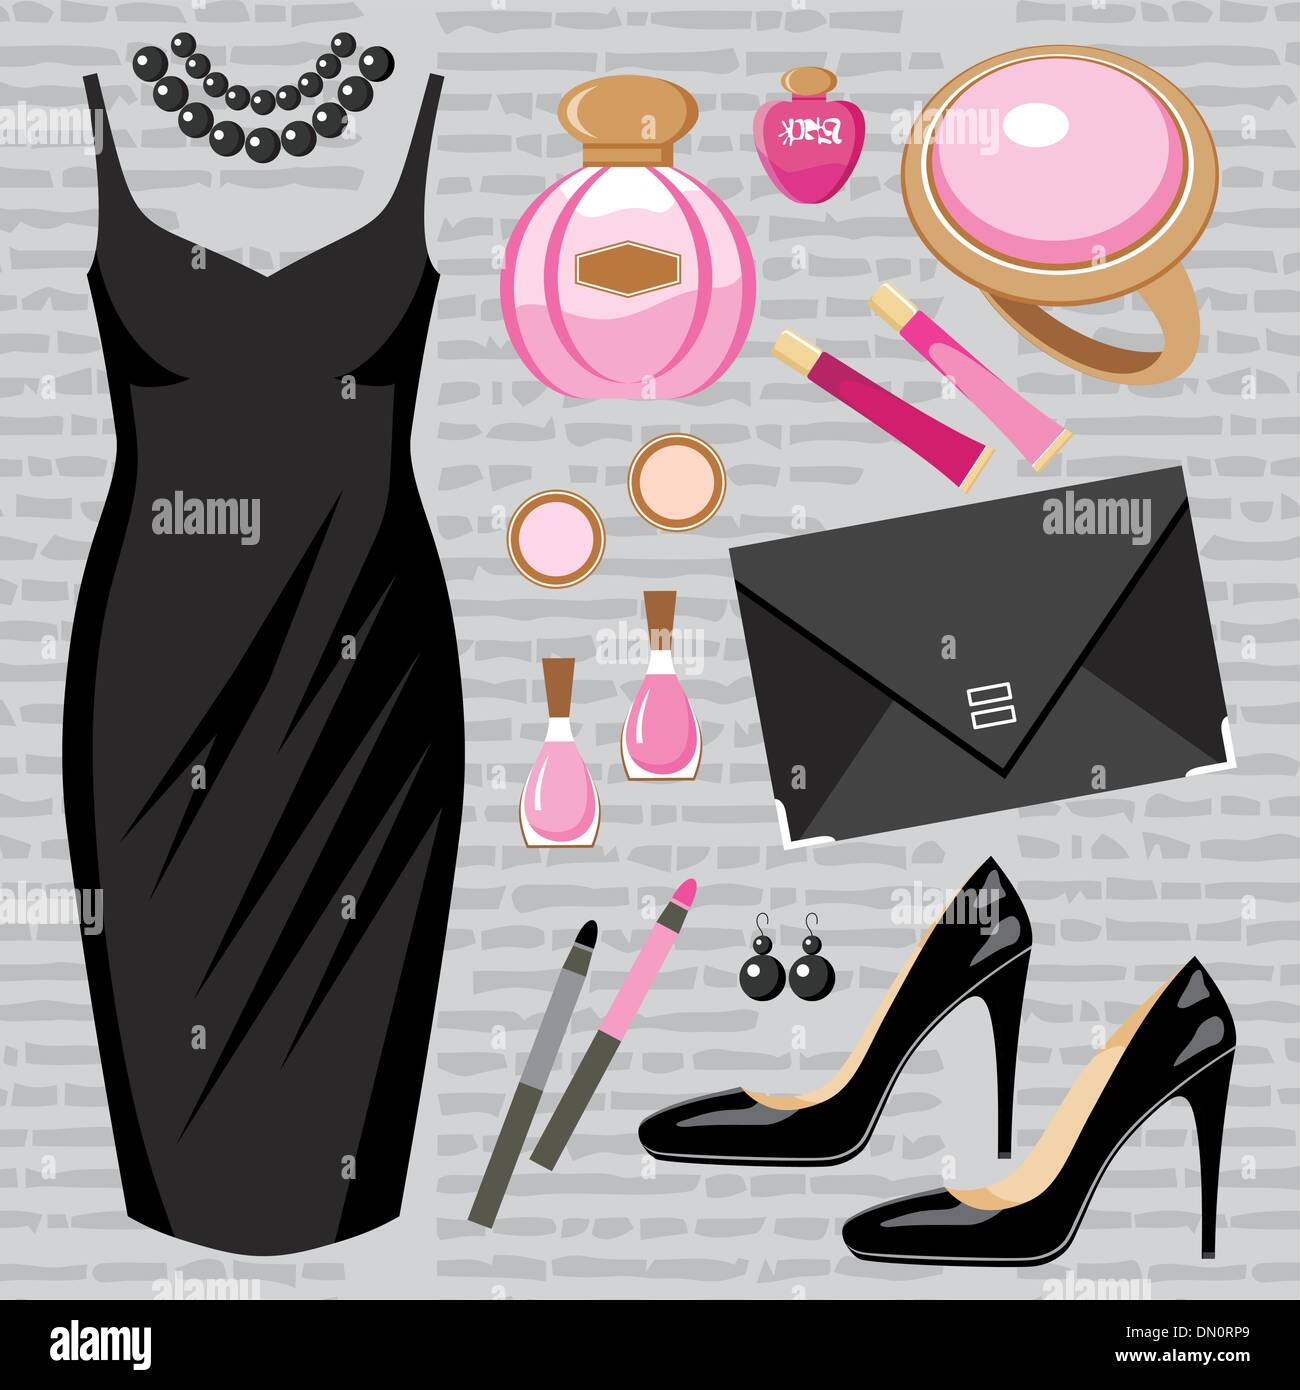 Fashion set with a cocktail dress Stock Vector